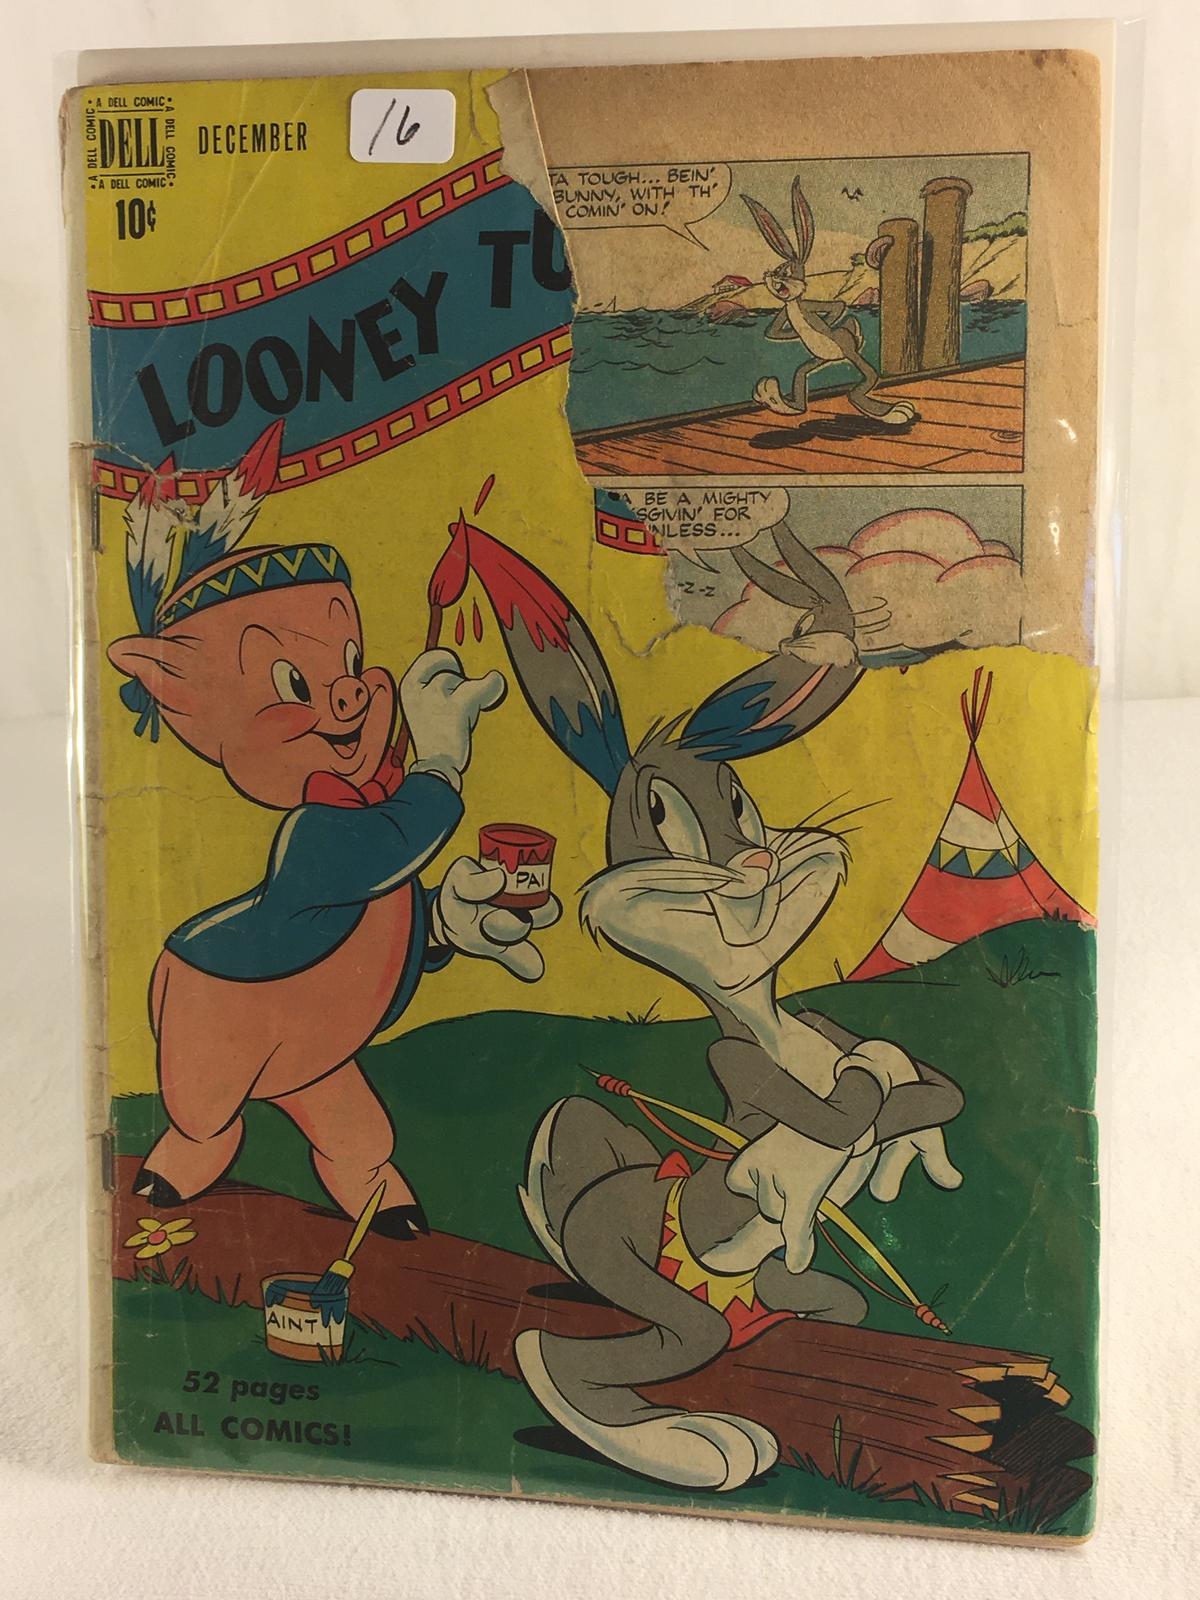 Collector Vintage Dell Comics Looney Tunes Comic Book - Has Ripped - See Pictures